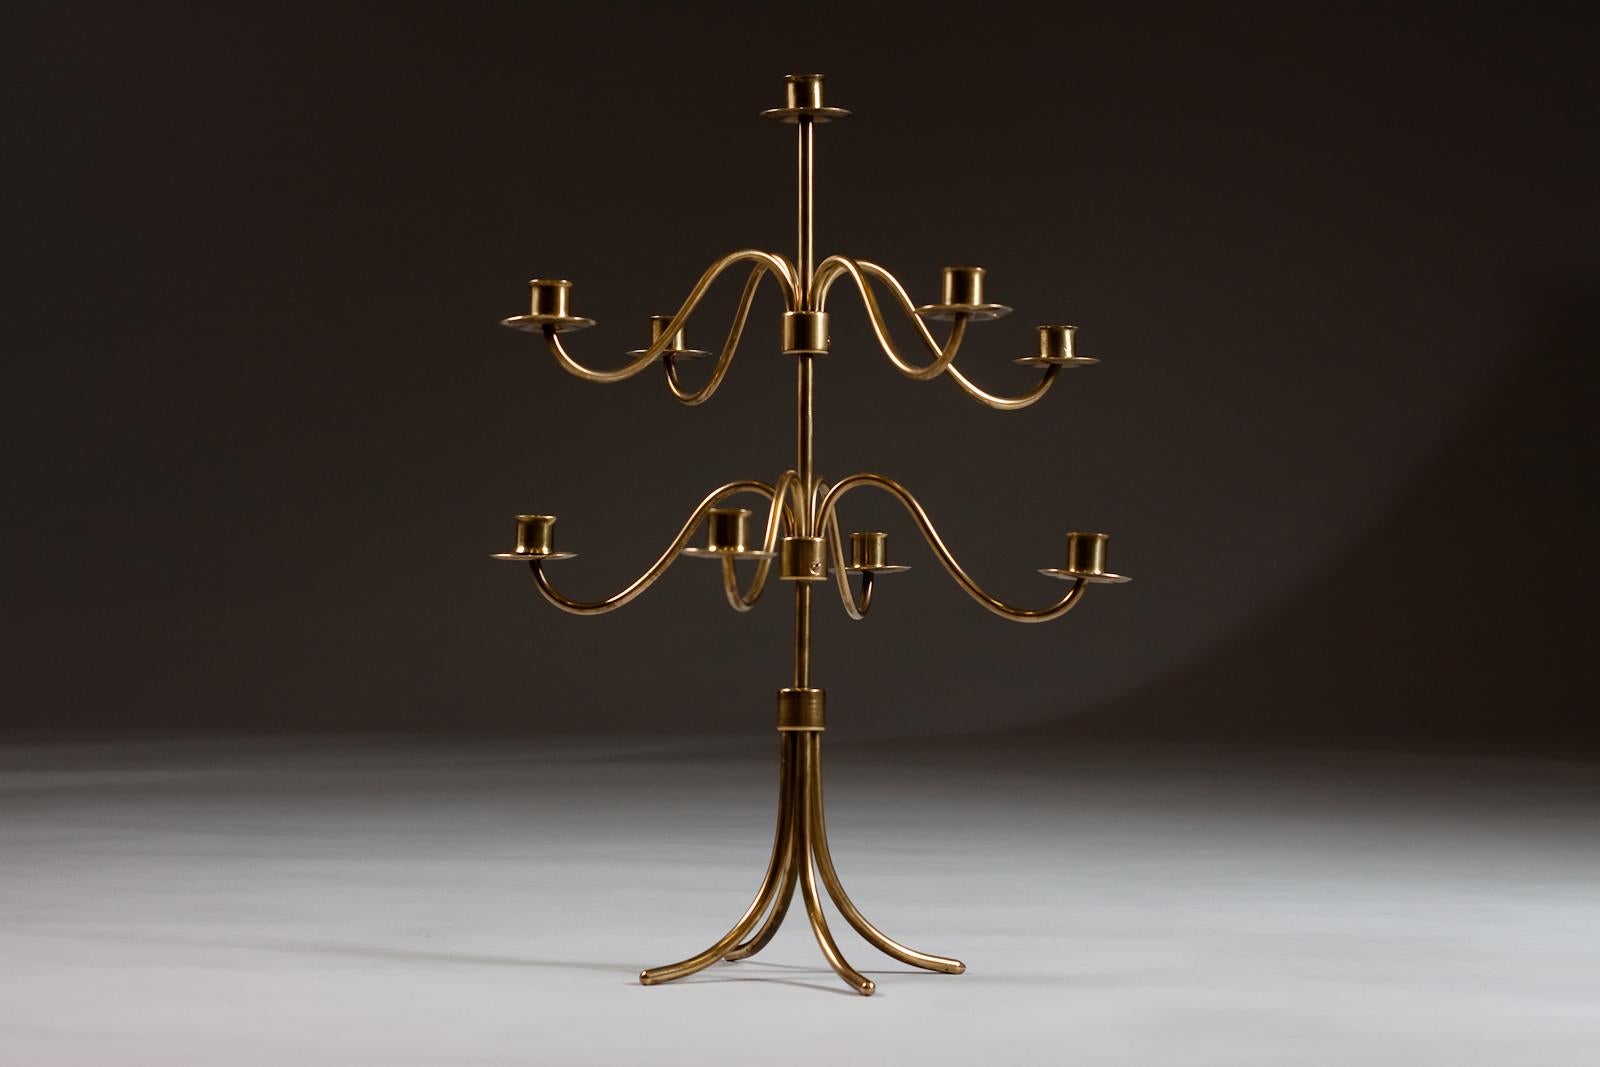 Beautiful adjustable brass candelabra by the famous designer Josef Frank from Sweden designed for Svenskt Tenn. The candelabra can hold 9 candles and due to its size, is an eye-catcher in any modern interior design.